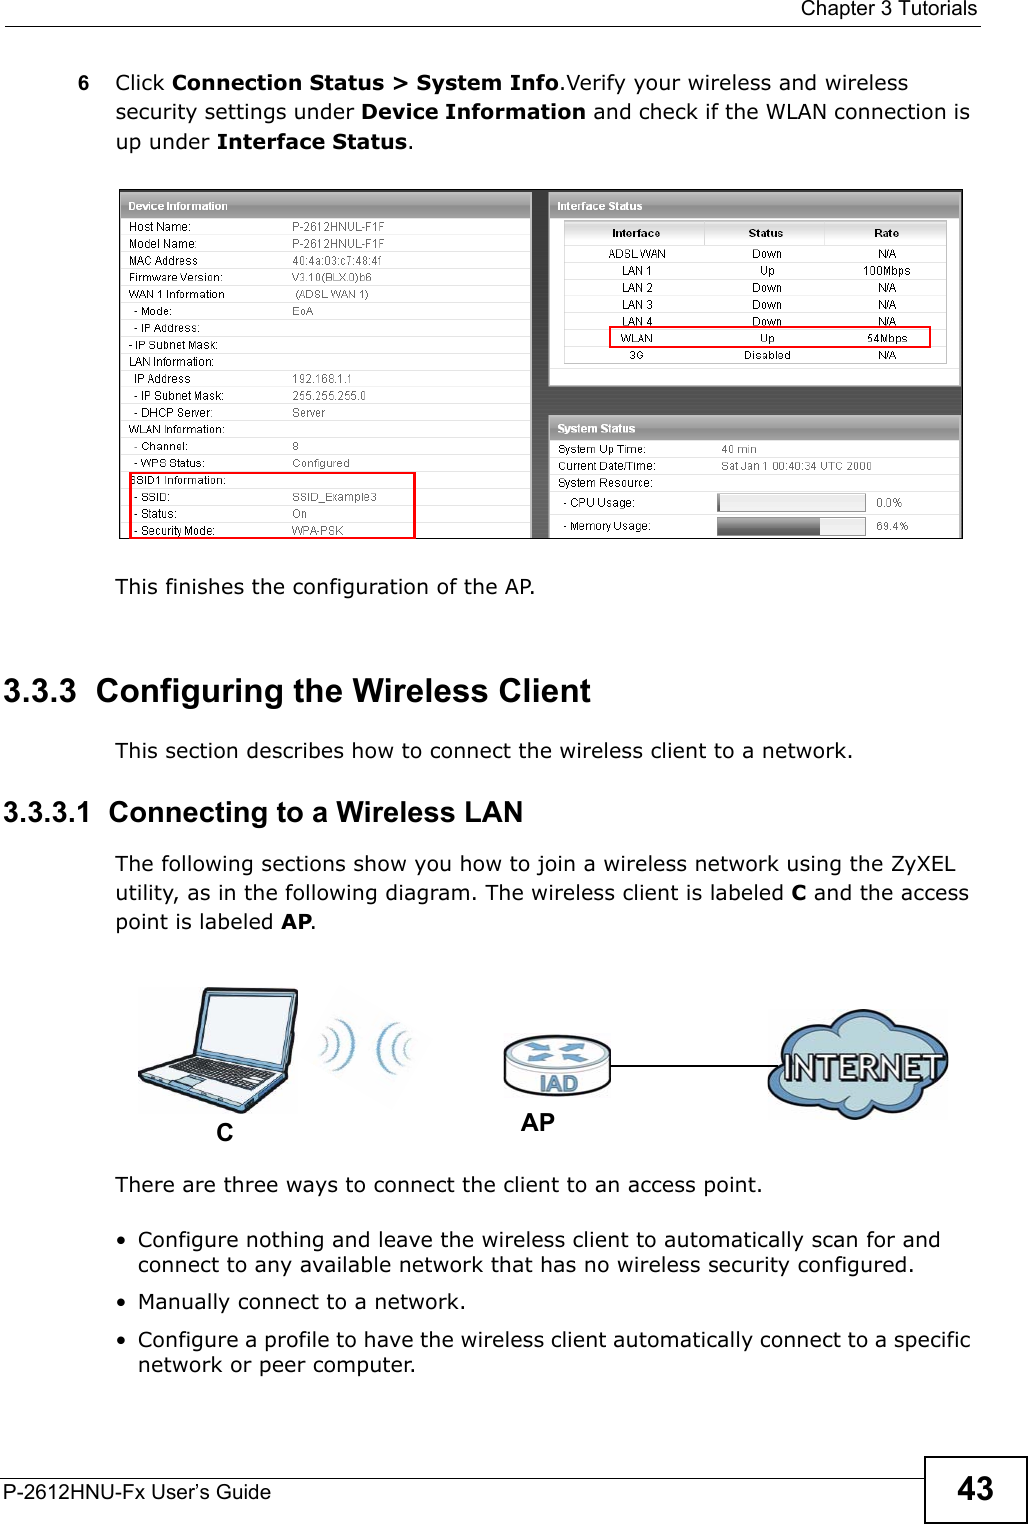  Chapter 3 TutorialsP-2612HNU-Fx User’s Guide 436Click Connection Status &gt; System Info.Verify your wireless and wireless security settings under Device Information and check if the WLAN connection is up under Interface Status.Tutorial: Network &gt; Wireless LAN &gt; Se curitOpen the Status screen. Verify your wireless and wirel ess security settings under Devi ce Information and check  if the WLAN connection is up un der Interface StatusTutorial: StatusThis finishes the configuration of the AP.3.3.3  Configuring the Wireless ClientThis section describes how to connect the wireless client to a network.3.3.3.1  Connecting to a Wireless LANThe following sections show you how to join a wireless network using the ZyXELutility, as in the following diagram. The wireless client is labeled Cand the access point is labeled AP.Wireless LAN SetupThere are three ways to connect the client to an access point.• Configure nothing and leave the wireless client to automatically scan for and connect to any available network that has no wireless security configured.• Manually connect to a network.• Configure a profile to have the wireless client automatically connect to a specificnetwork or peer computer. CAP